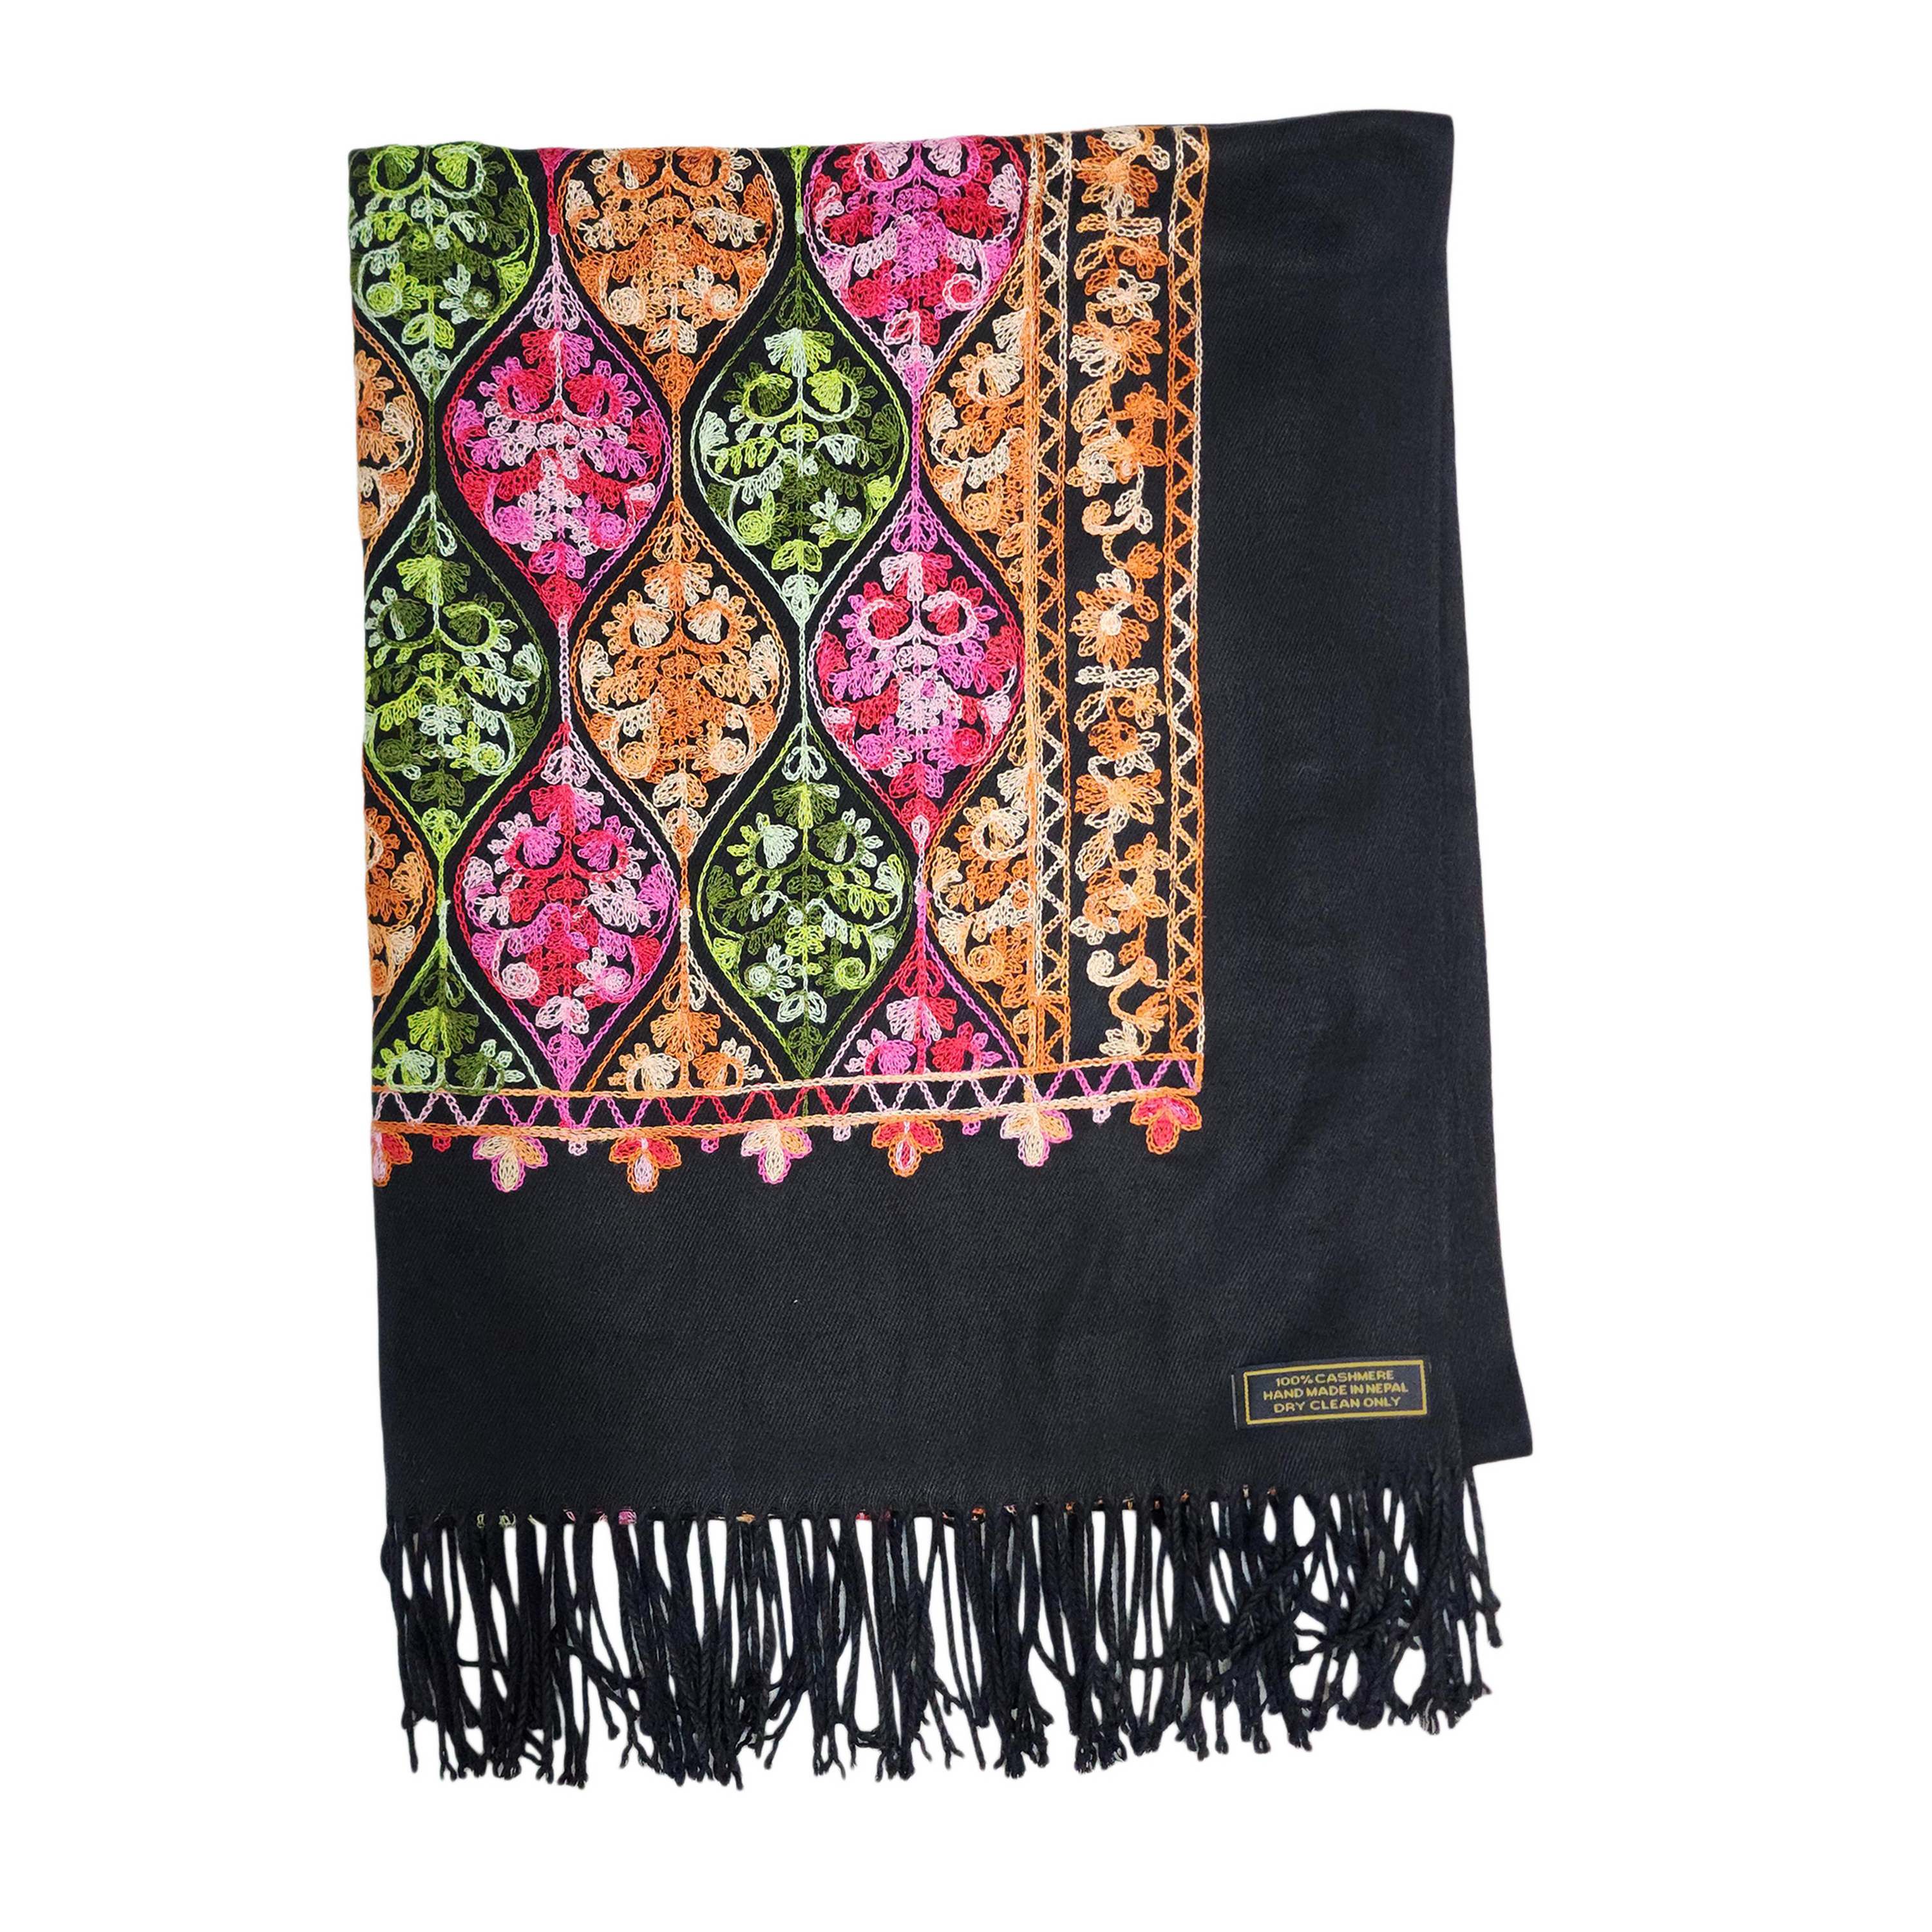 Desigener Shawl, Thick Nepali Shawl, With Heavy Embroidery, Color black